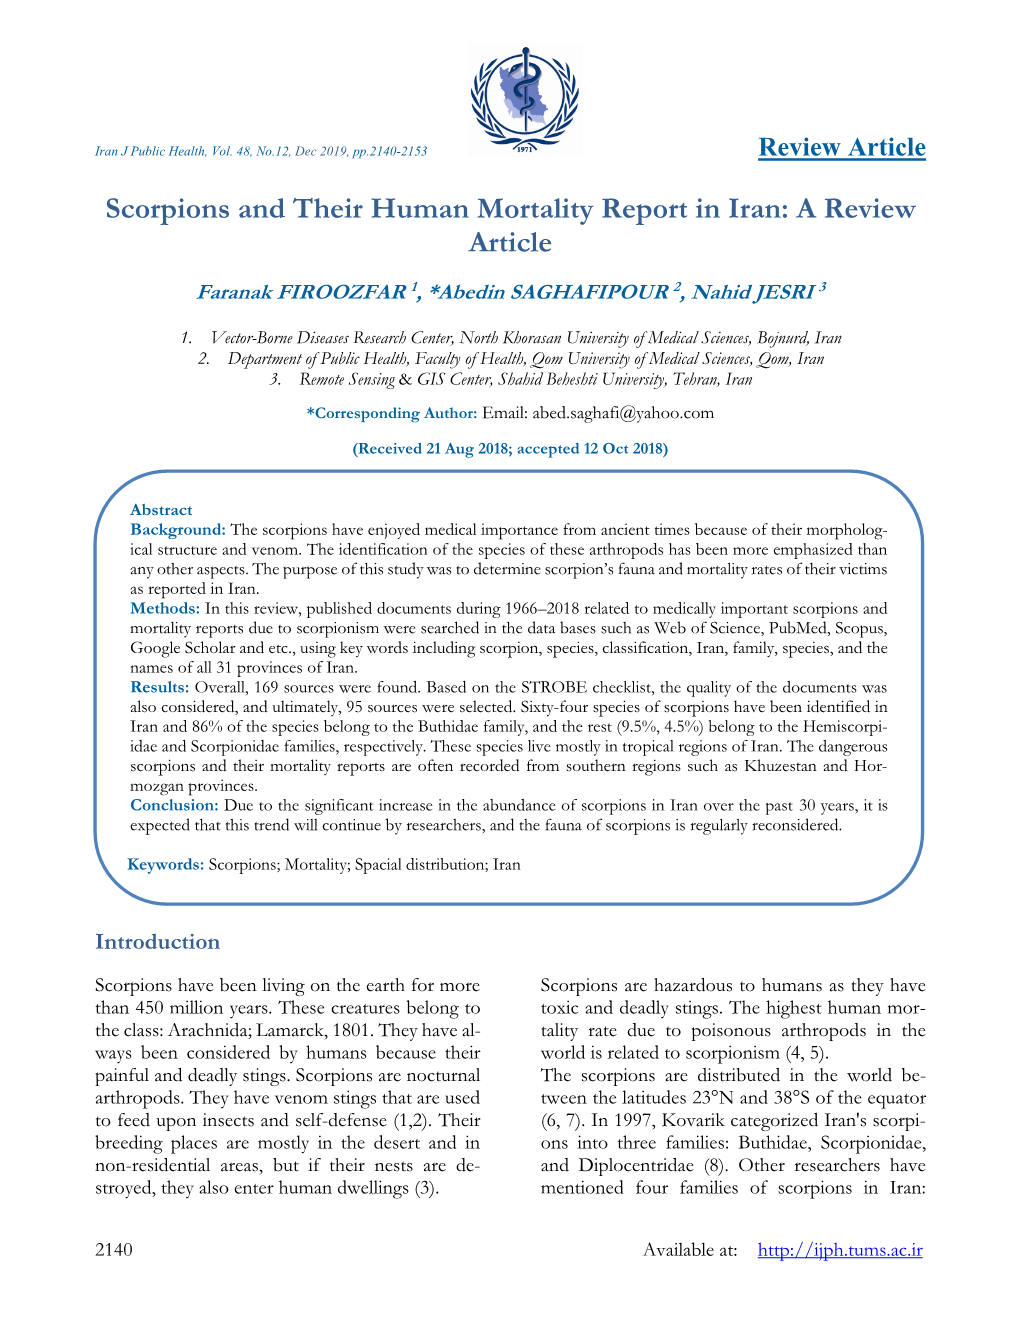 Scorpions and Their Human Mortality Report in Iran: a Review Article